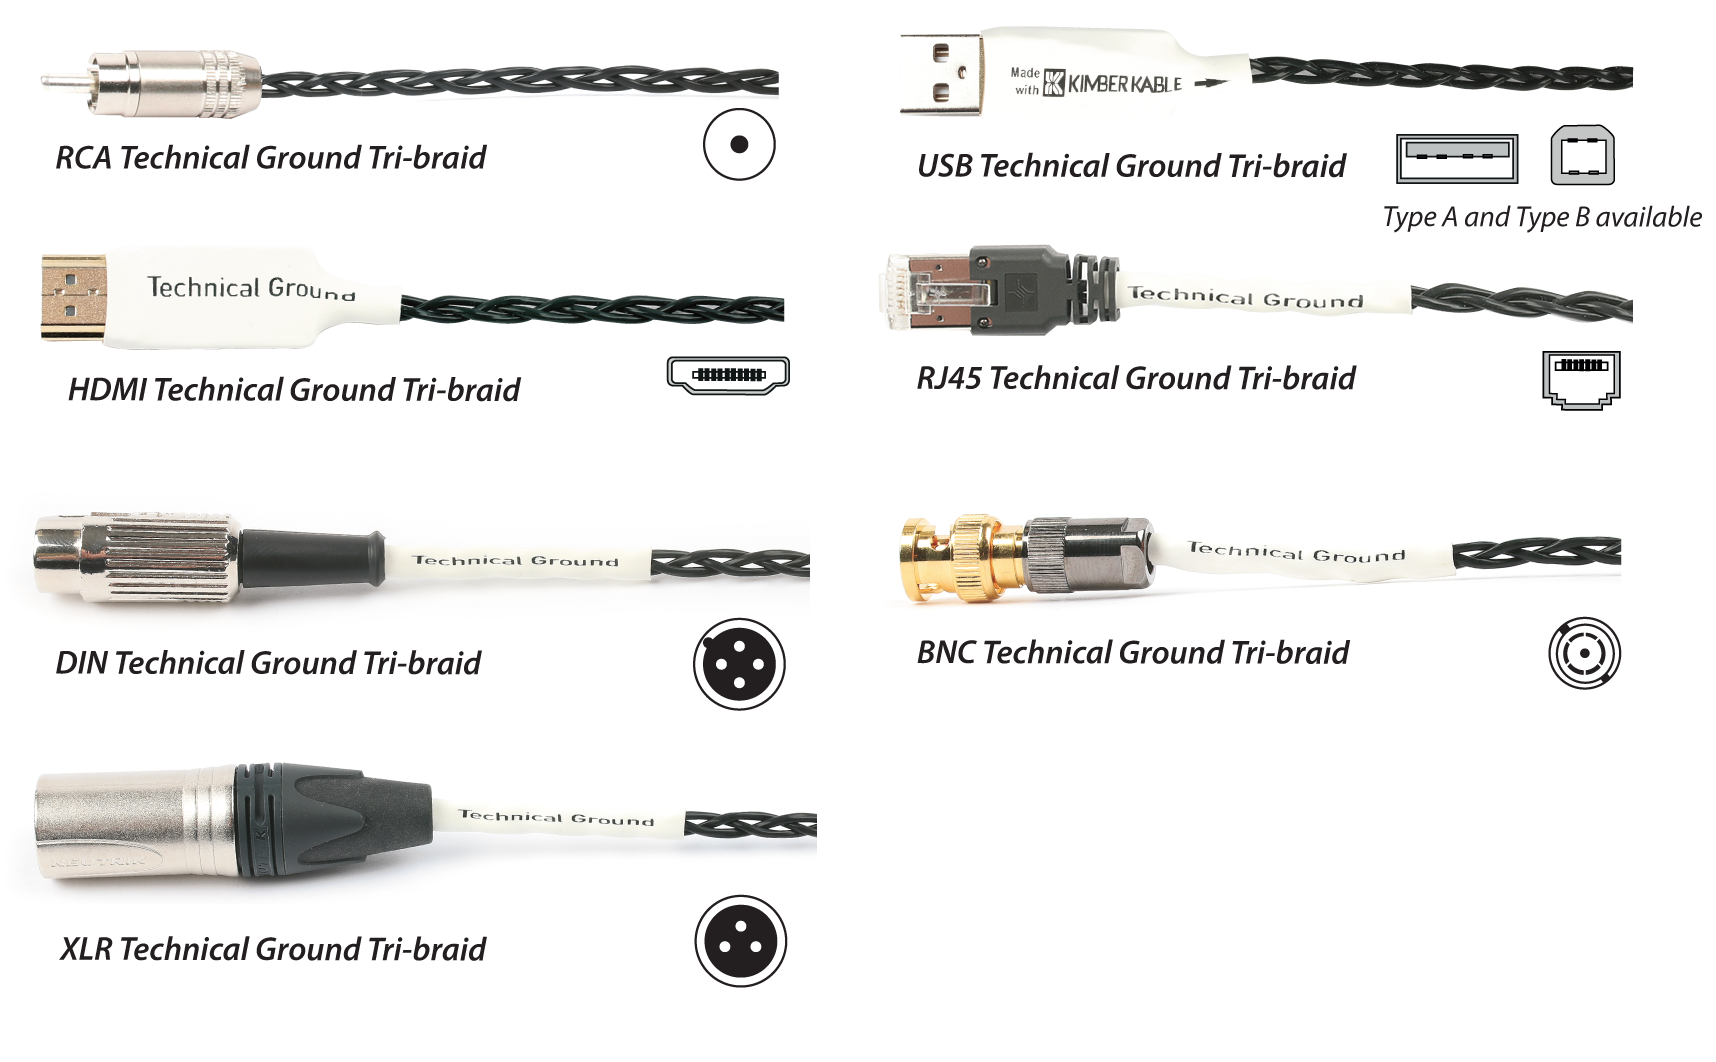 Technical Ground Tri-Braid cables